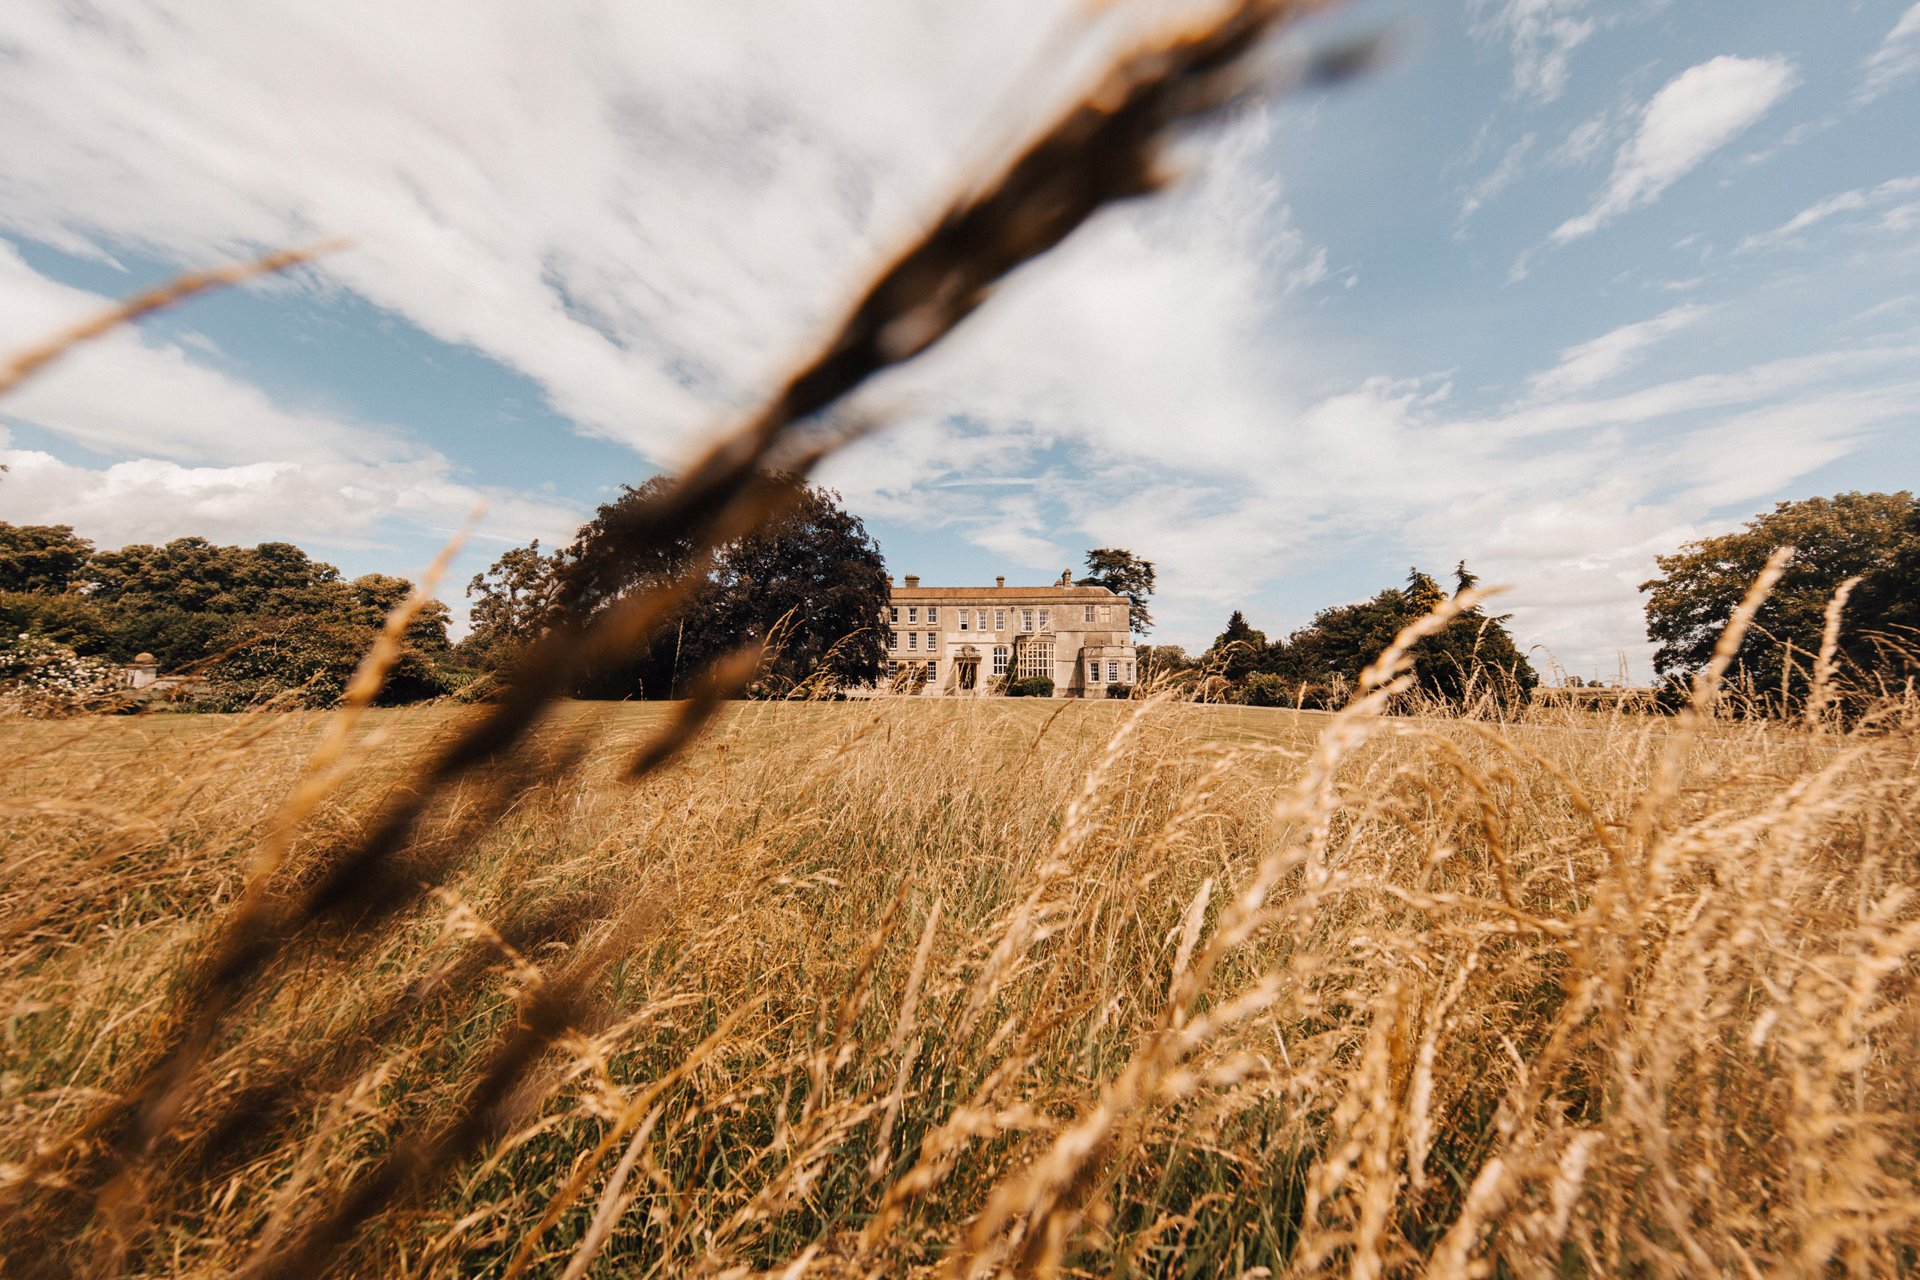 Long grasses of the Cotswolds country estate wedding venue where Zest will be placed at Elmore Court in January 2022